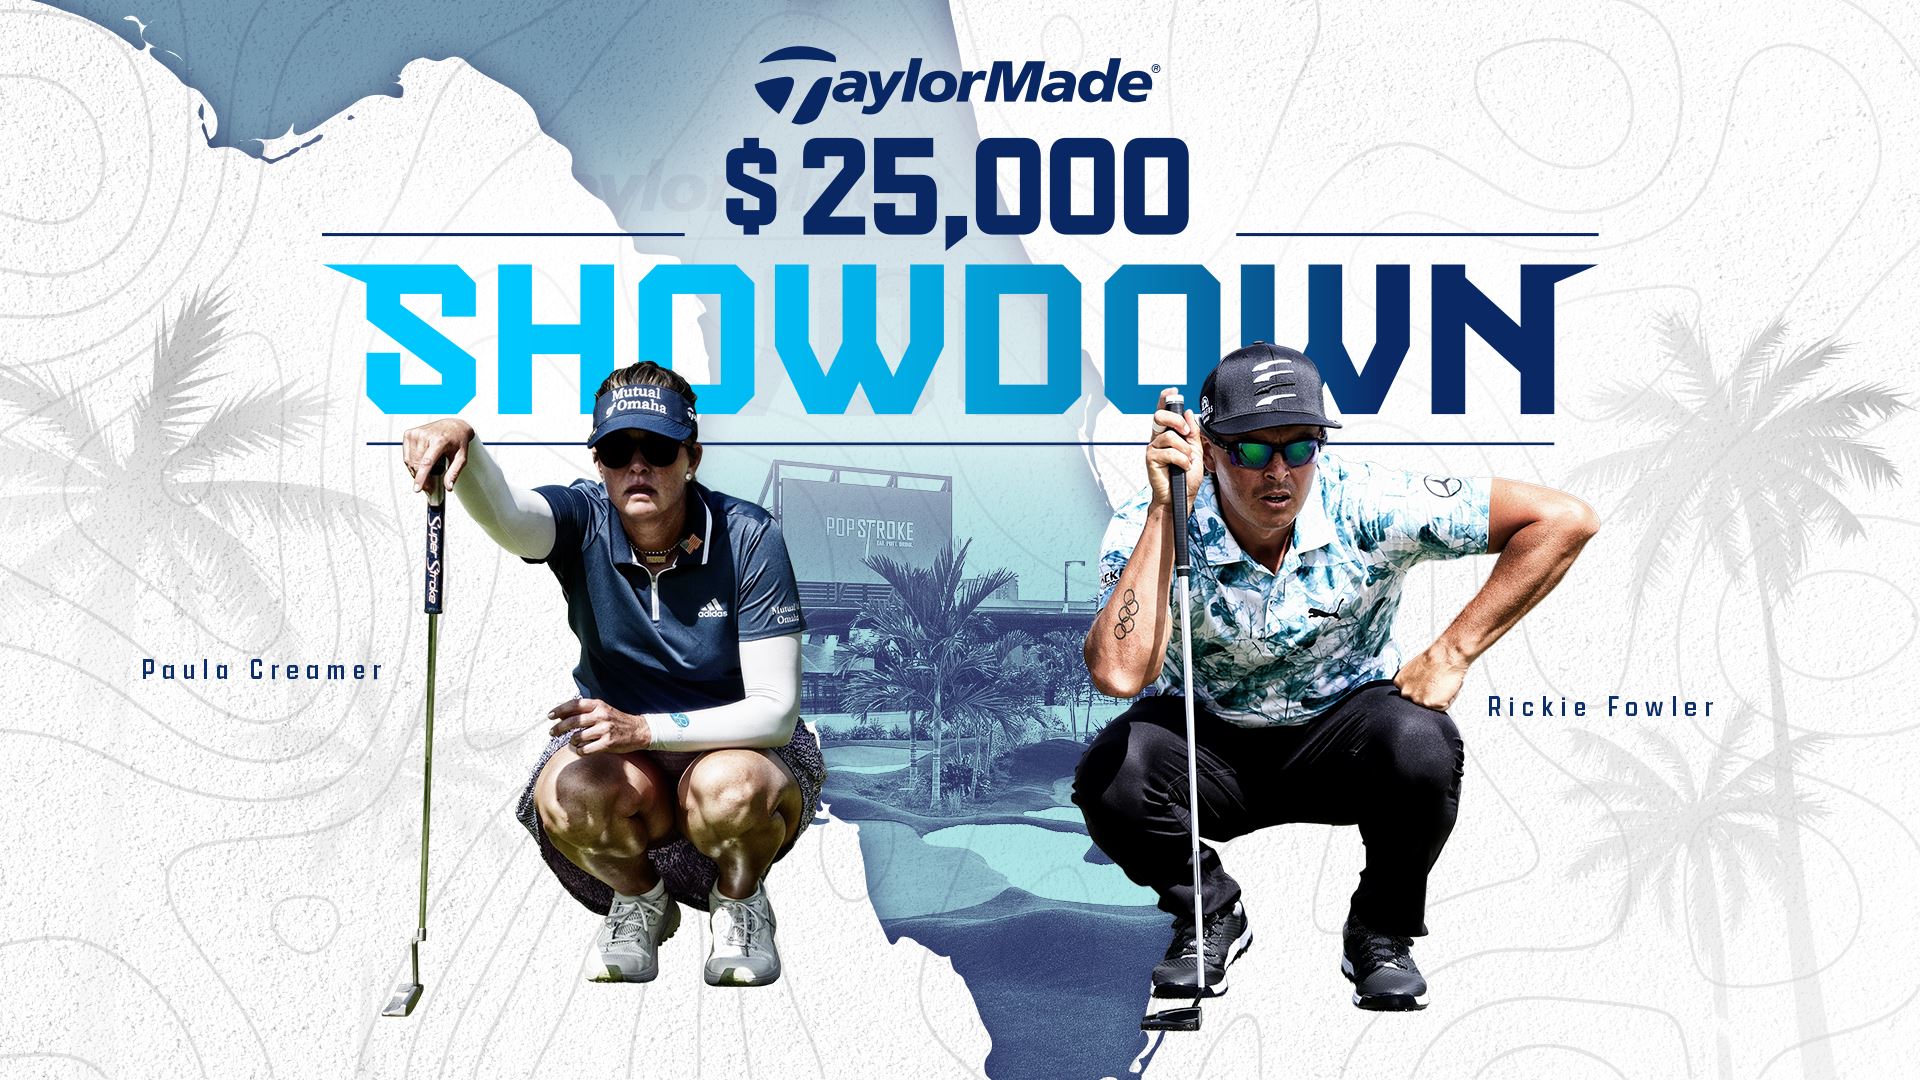 Rickie Fowler and Paula Creamer to Play in PopStroke Tour Championship Presented by TaylorMade